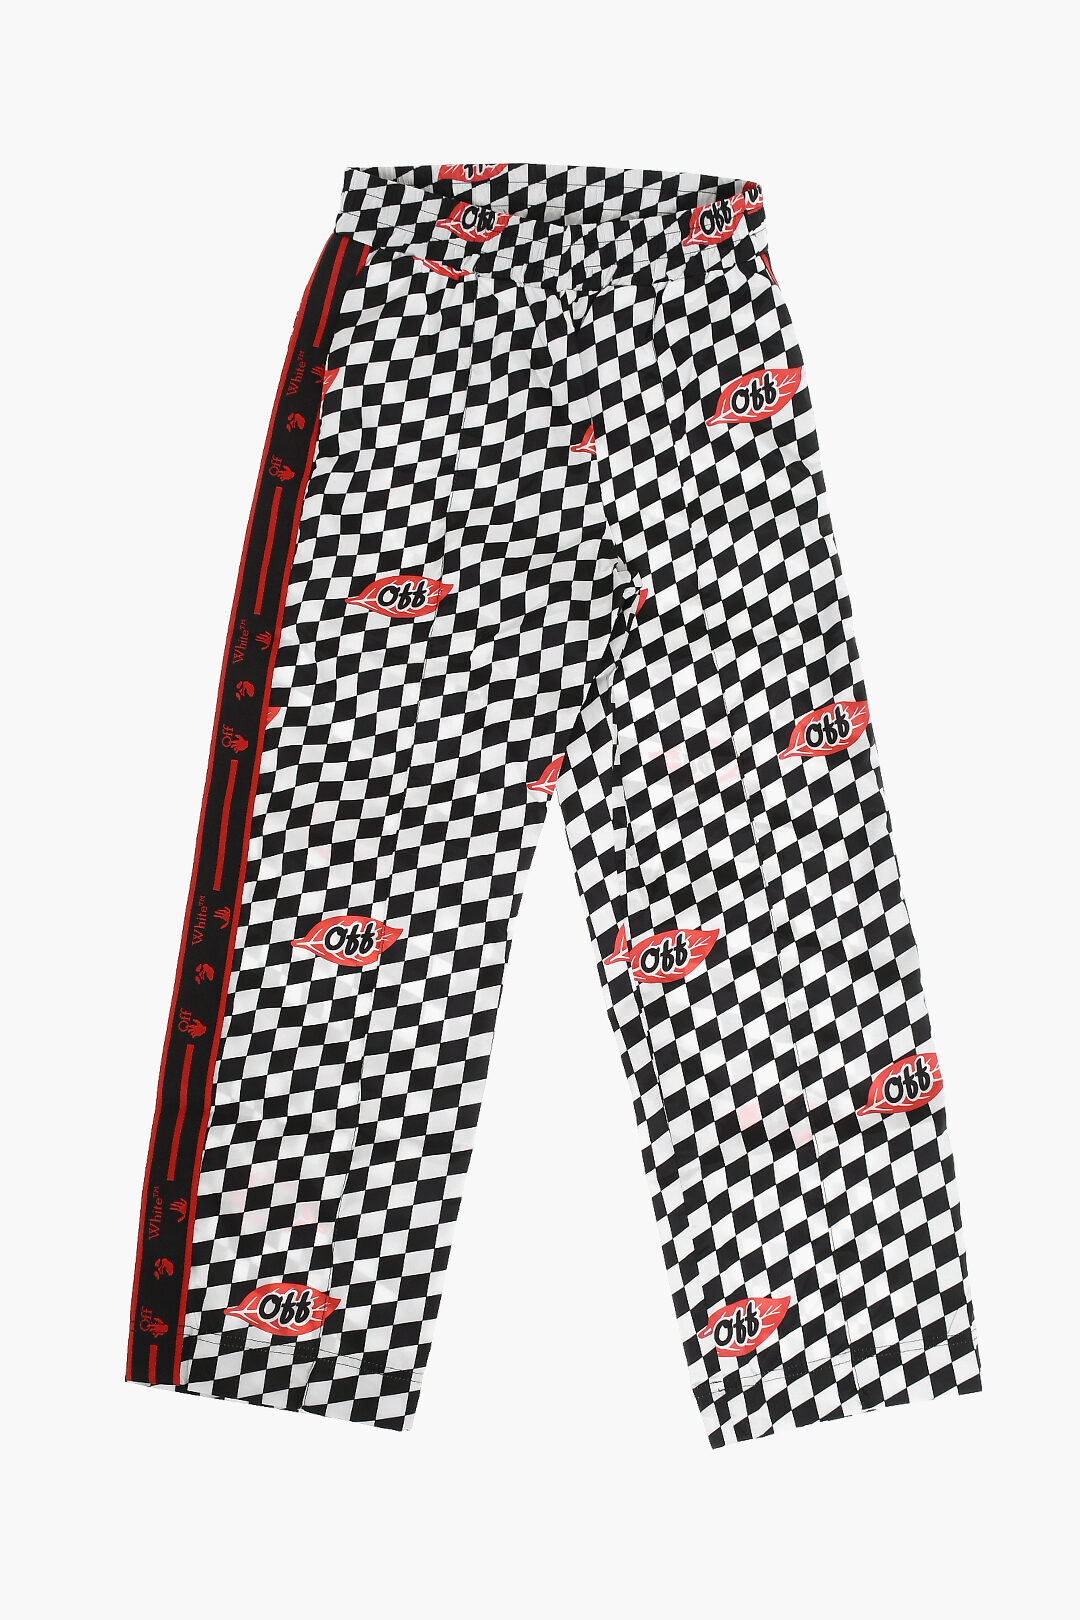  OFF-WHITE オフ ホワイト パンツ OBCJ001F21FAB0021001 ボーイズ TECHNICAL FABRIC CHECKED CHESSBOARD PANTS WITH ALL OVER OFF  dk